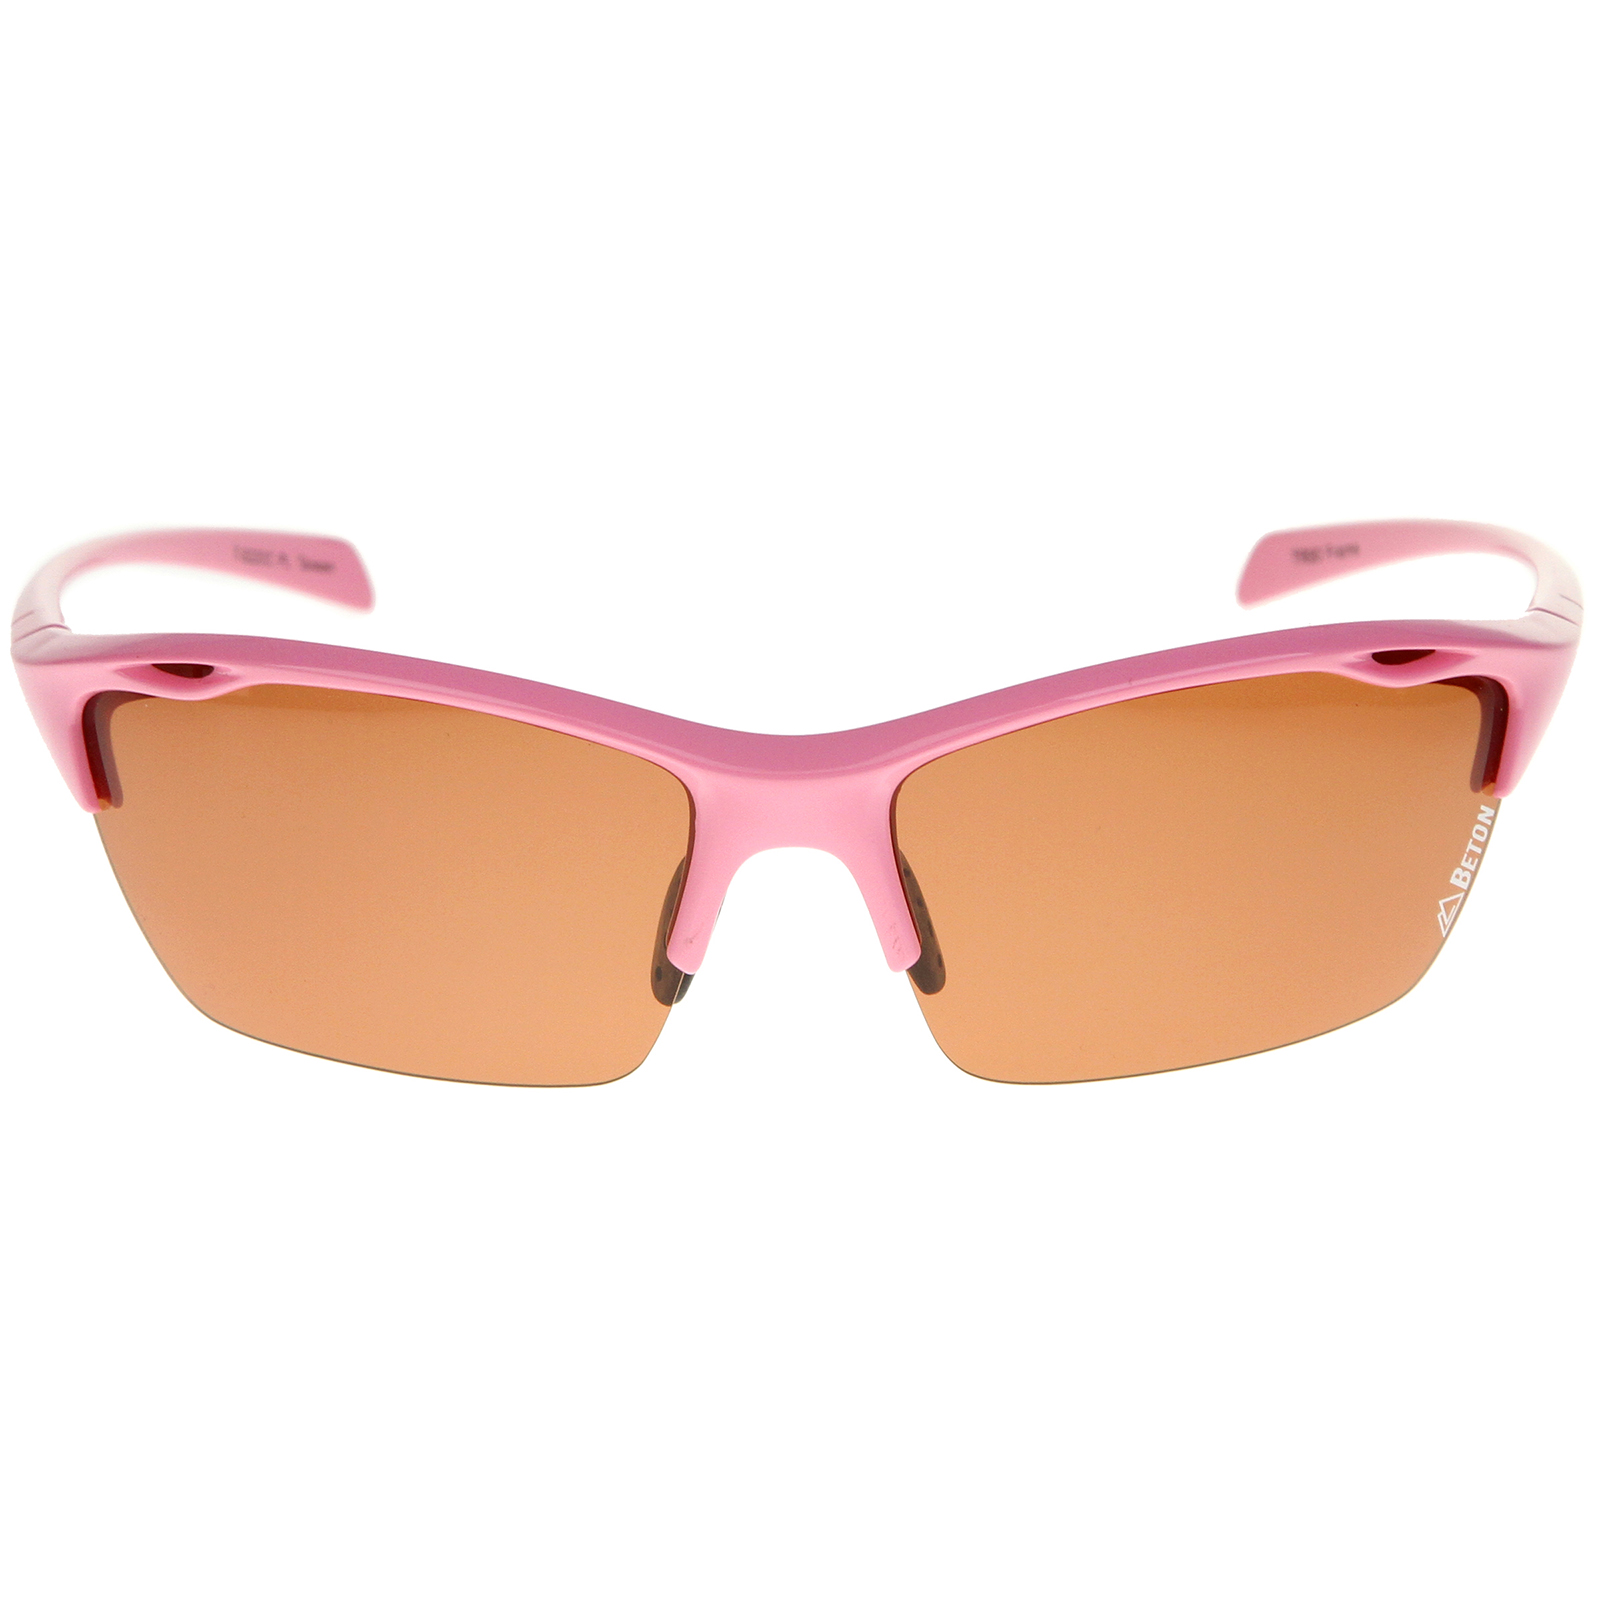 Beton Male Wakely - Polarized Shatterproof Lens Half-Frame TR-90 Sports Wrap Sunglasses (Shiny Pink / Brown) - 68mm - image 5 of 6